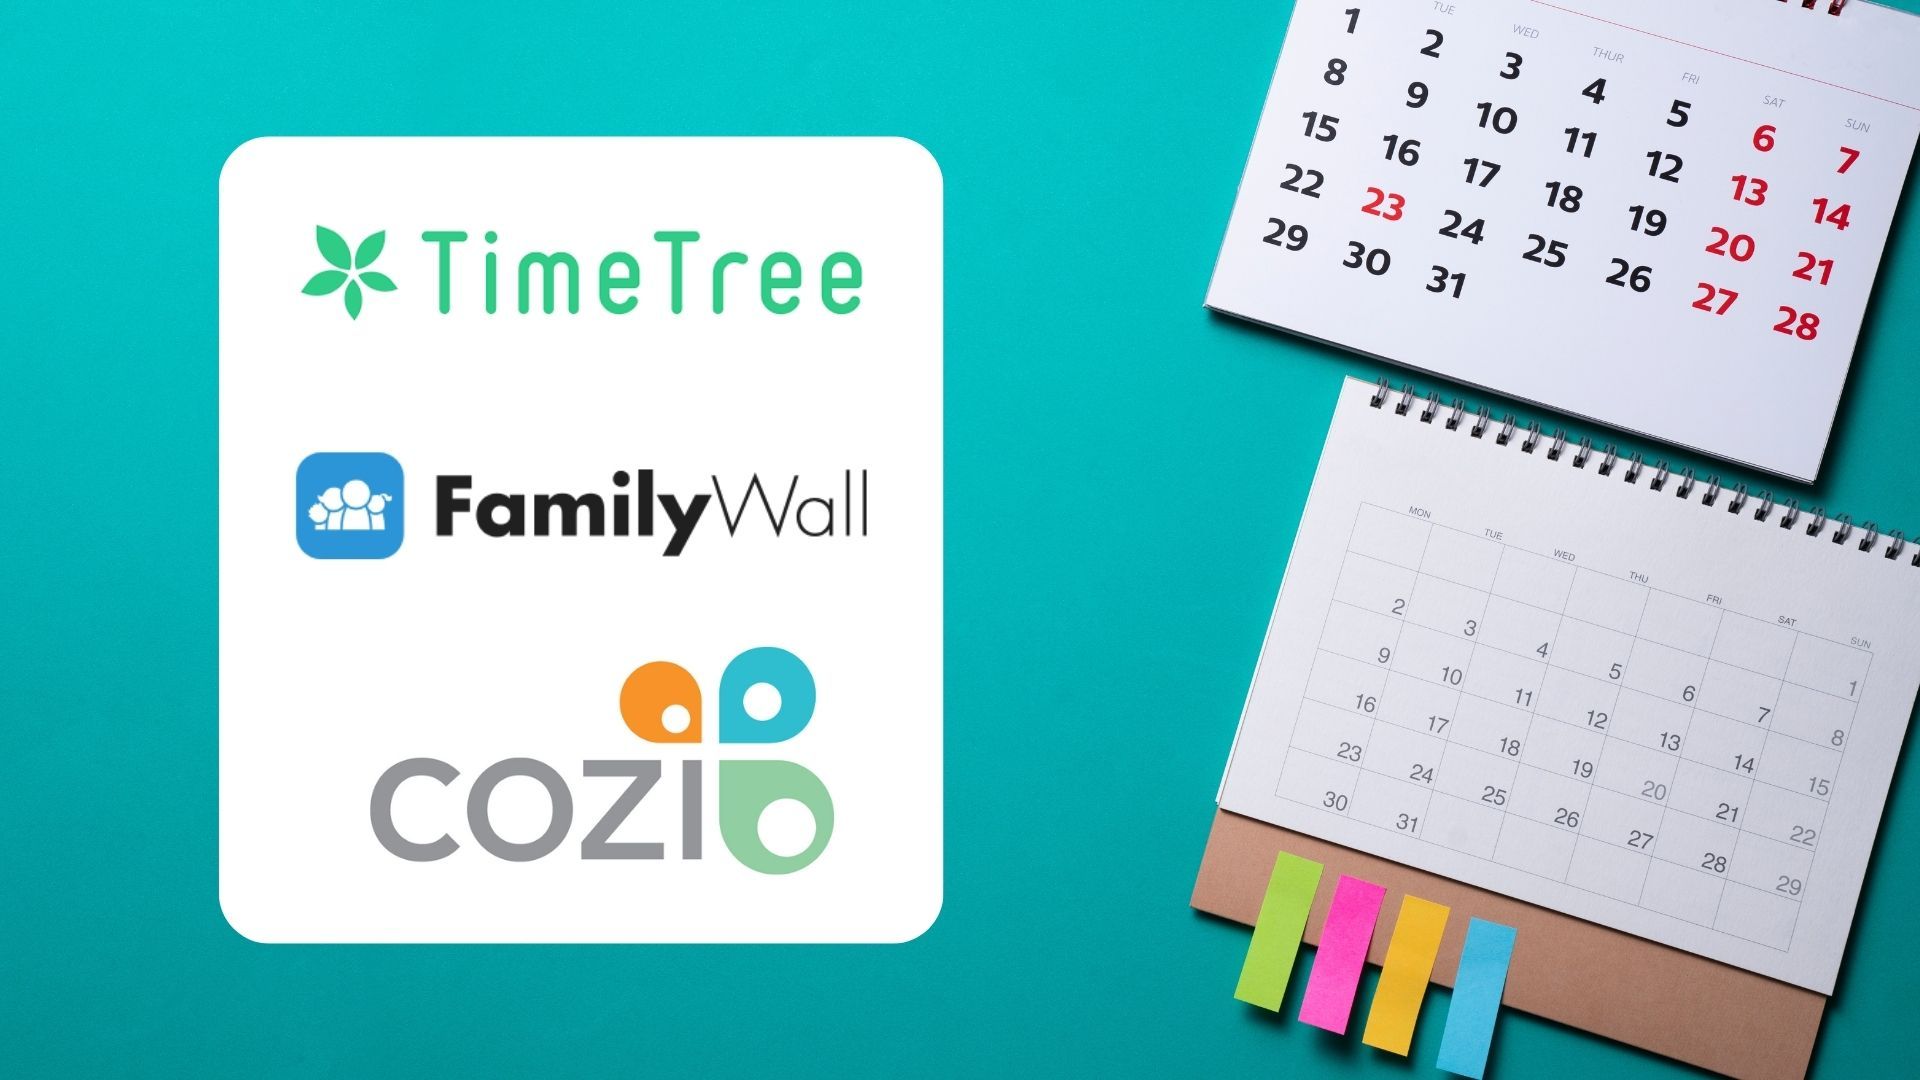 Examples of family planners are: Cozi, FamilyWall, TimeTree.